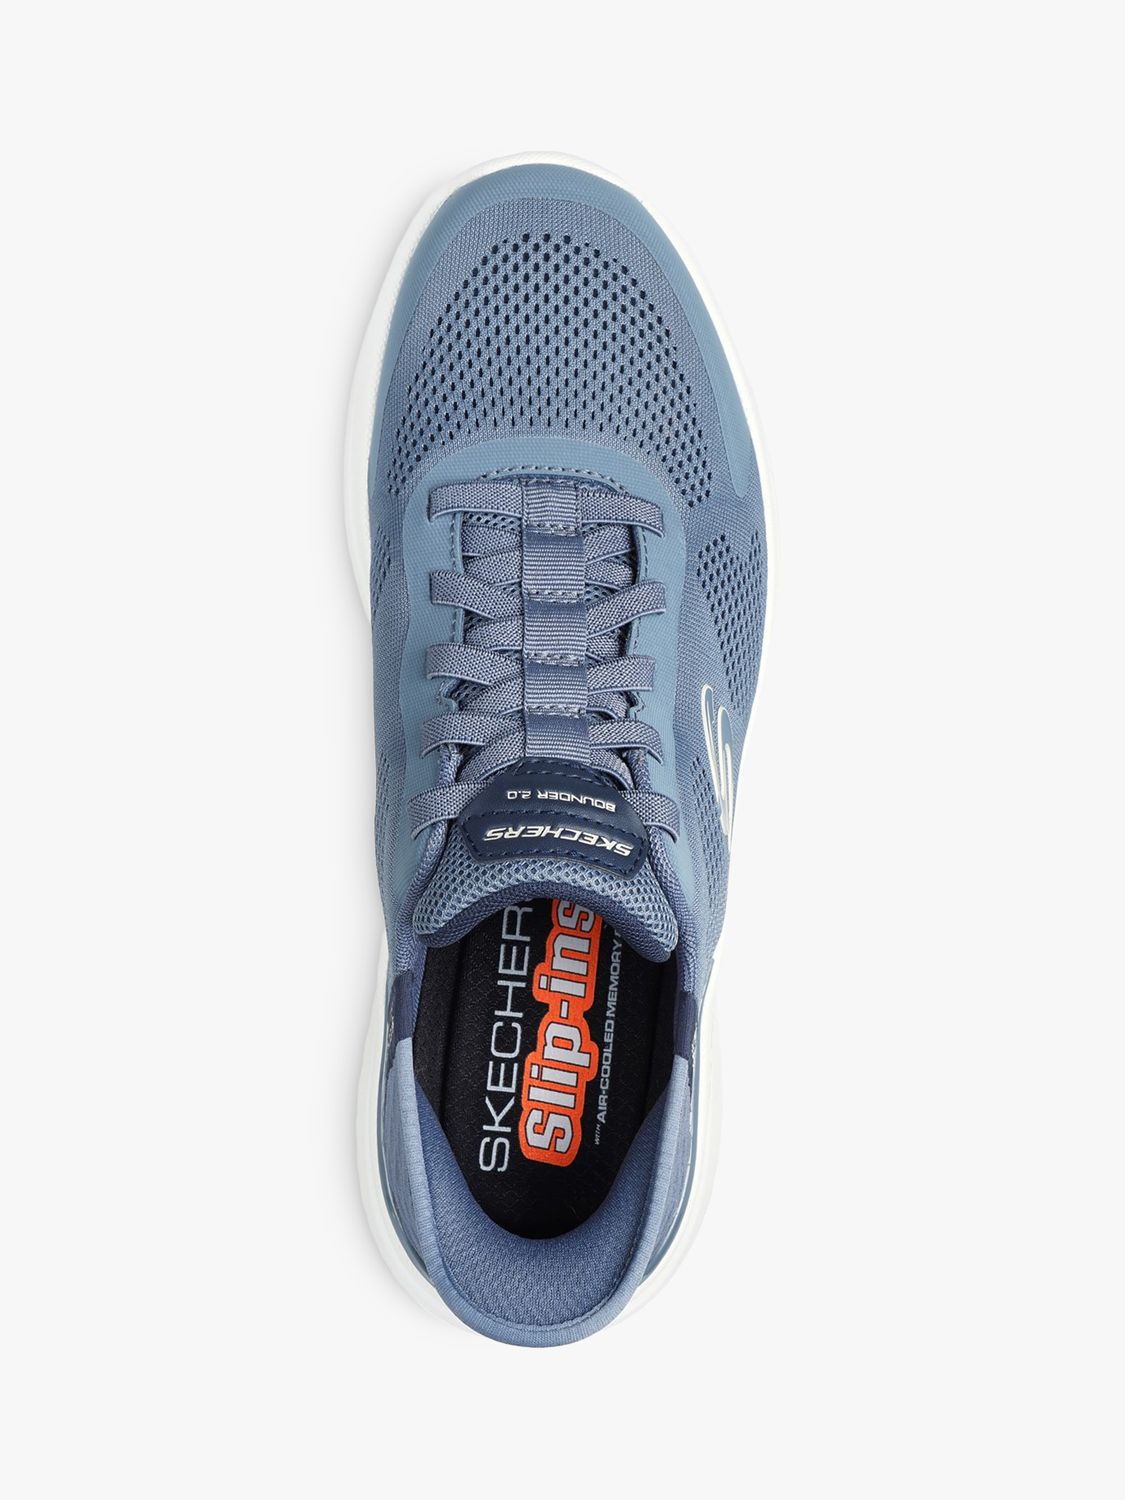 Buy Skechers Bounder 2.0 Emerged Trainers Online at johnlewis.com